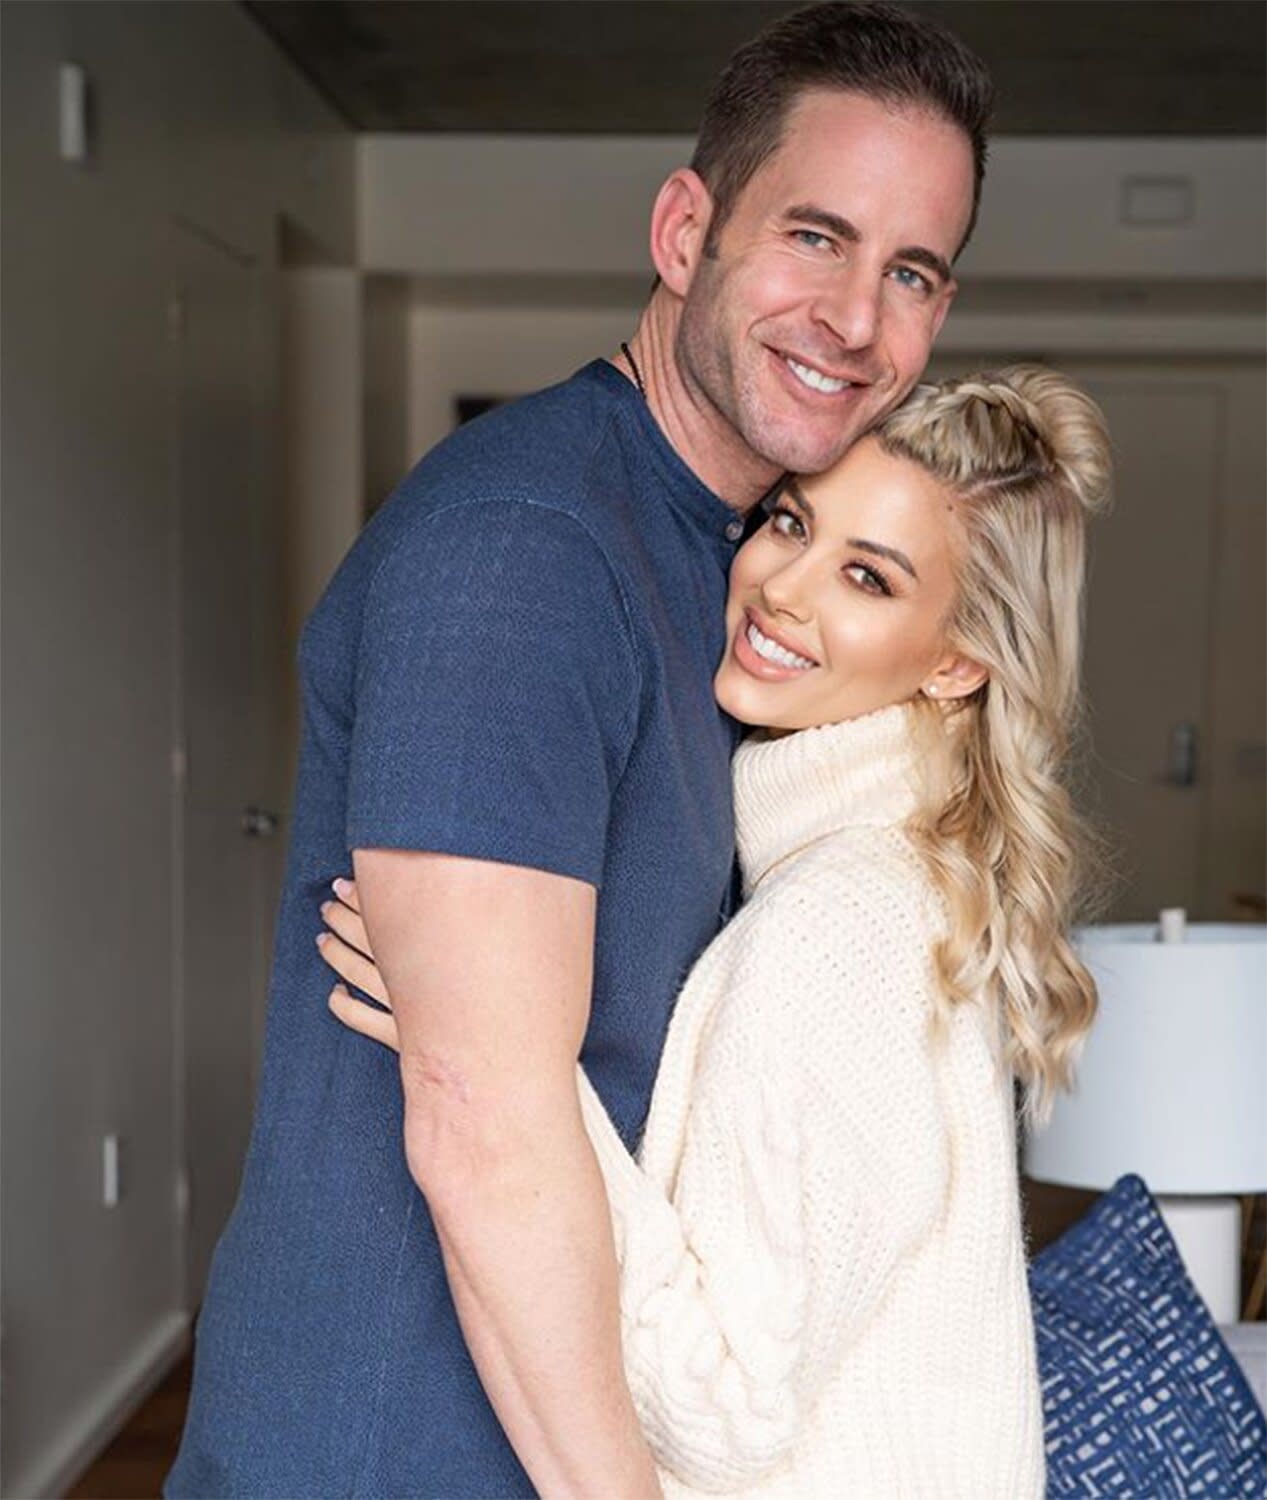 Tarek El Moussa reflects on how fast his romance with fiancée Heather Rae Young progressed